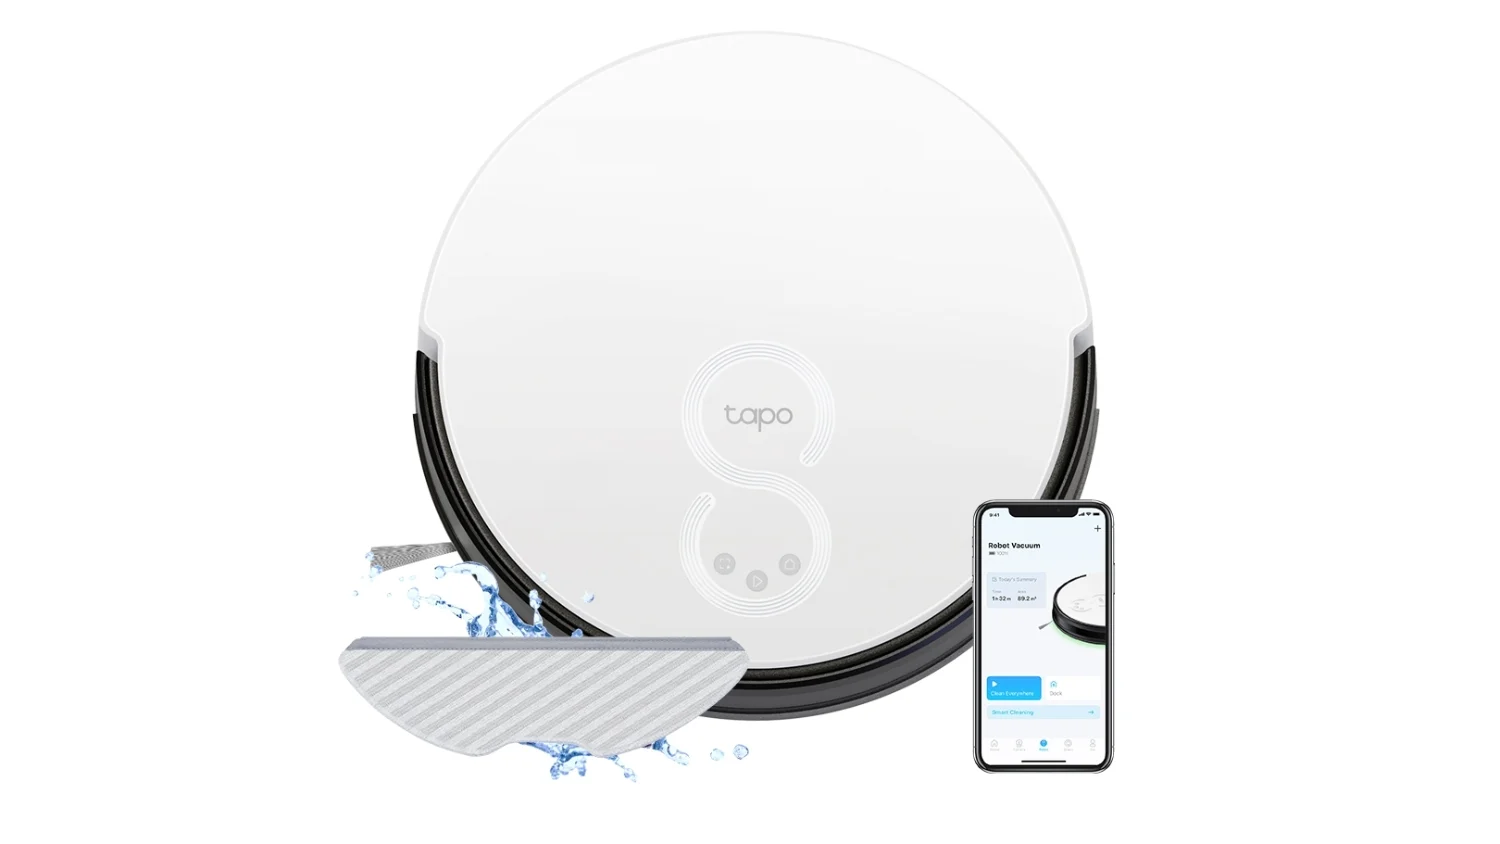 Marketing image (on a white background) of the TP-Link vacuum/mopping robot.  Vacuum in the middle with splashing water on the left and the smartphone app on the right.